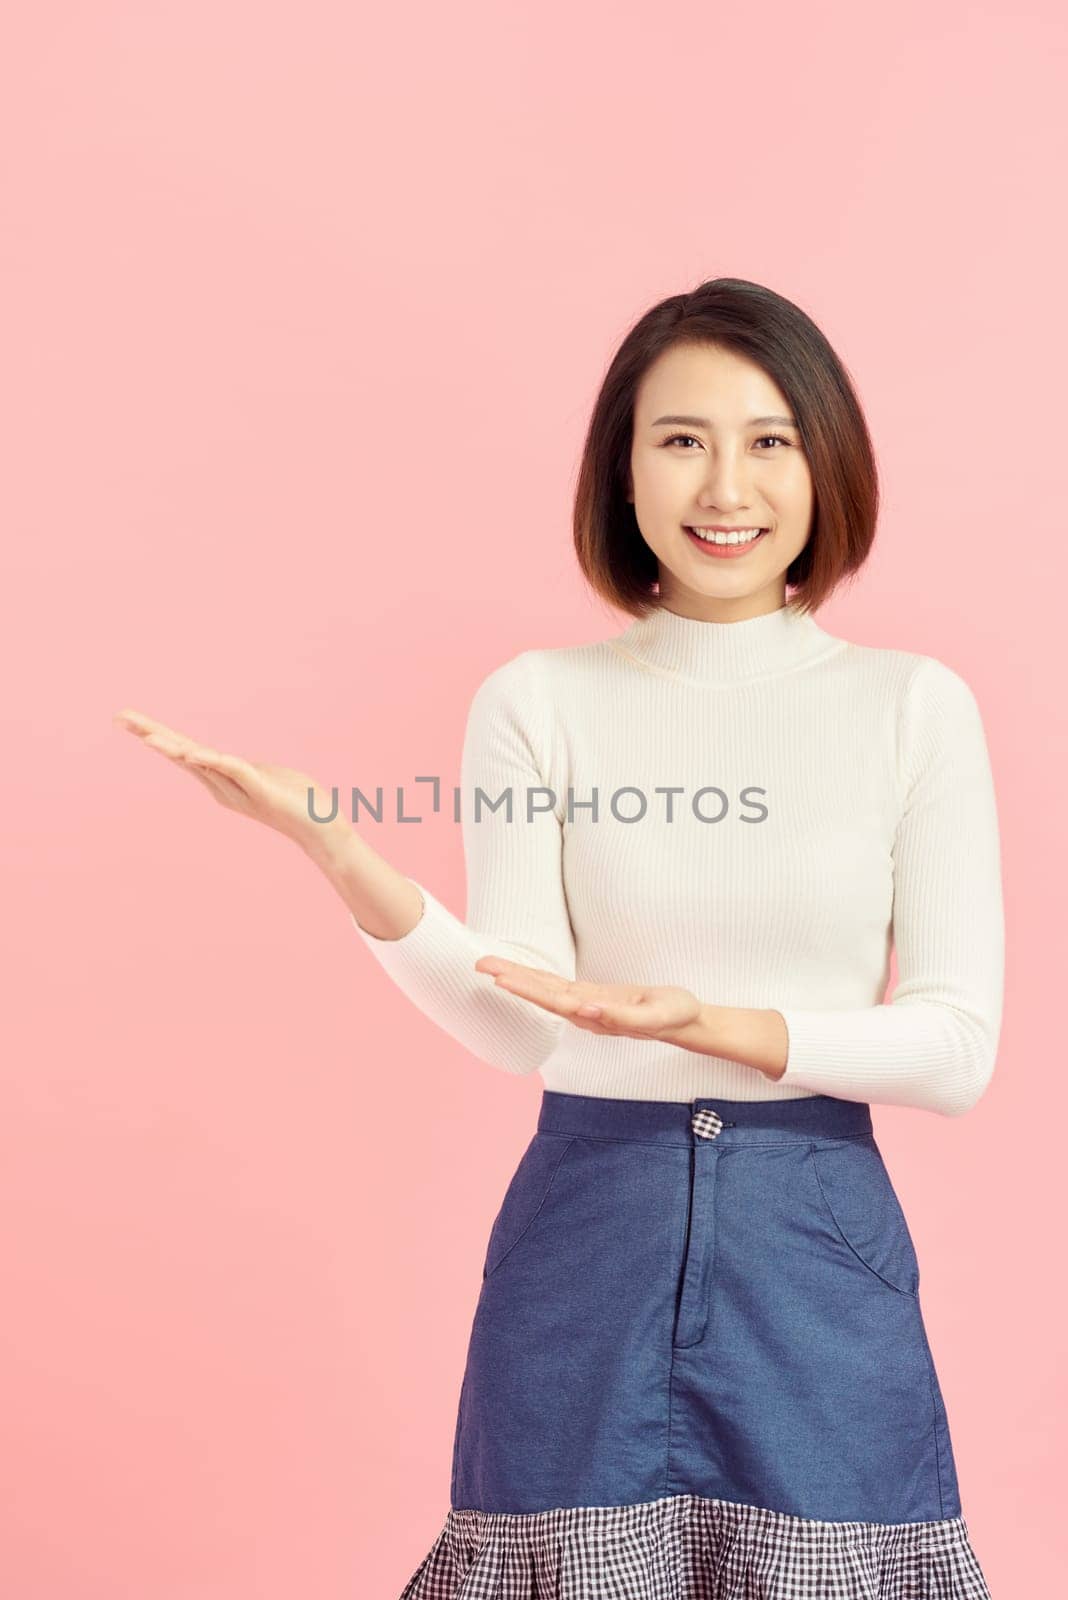 Beauty skincare Asian woman show something to you on the pink background